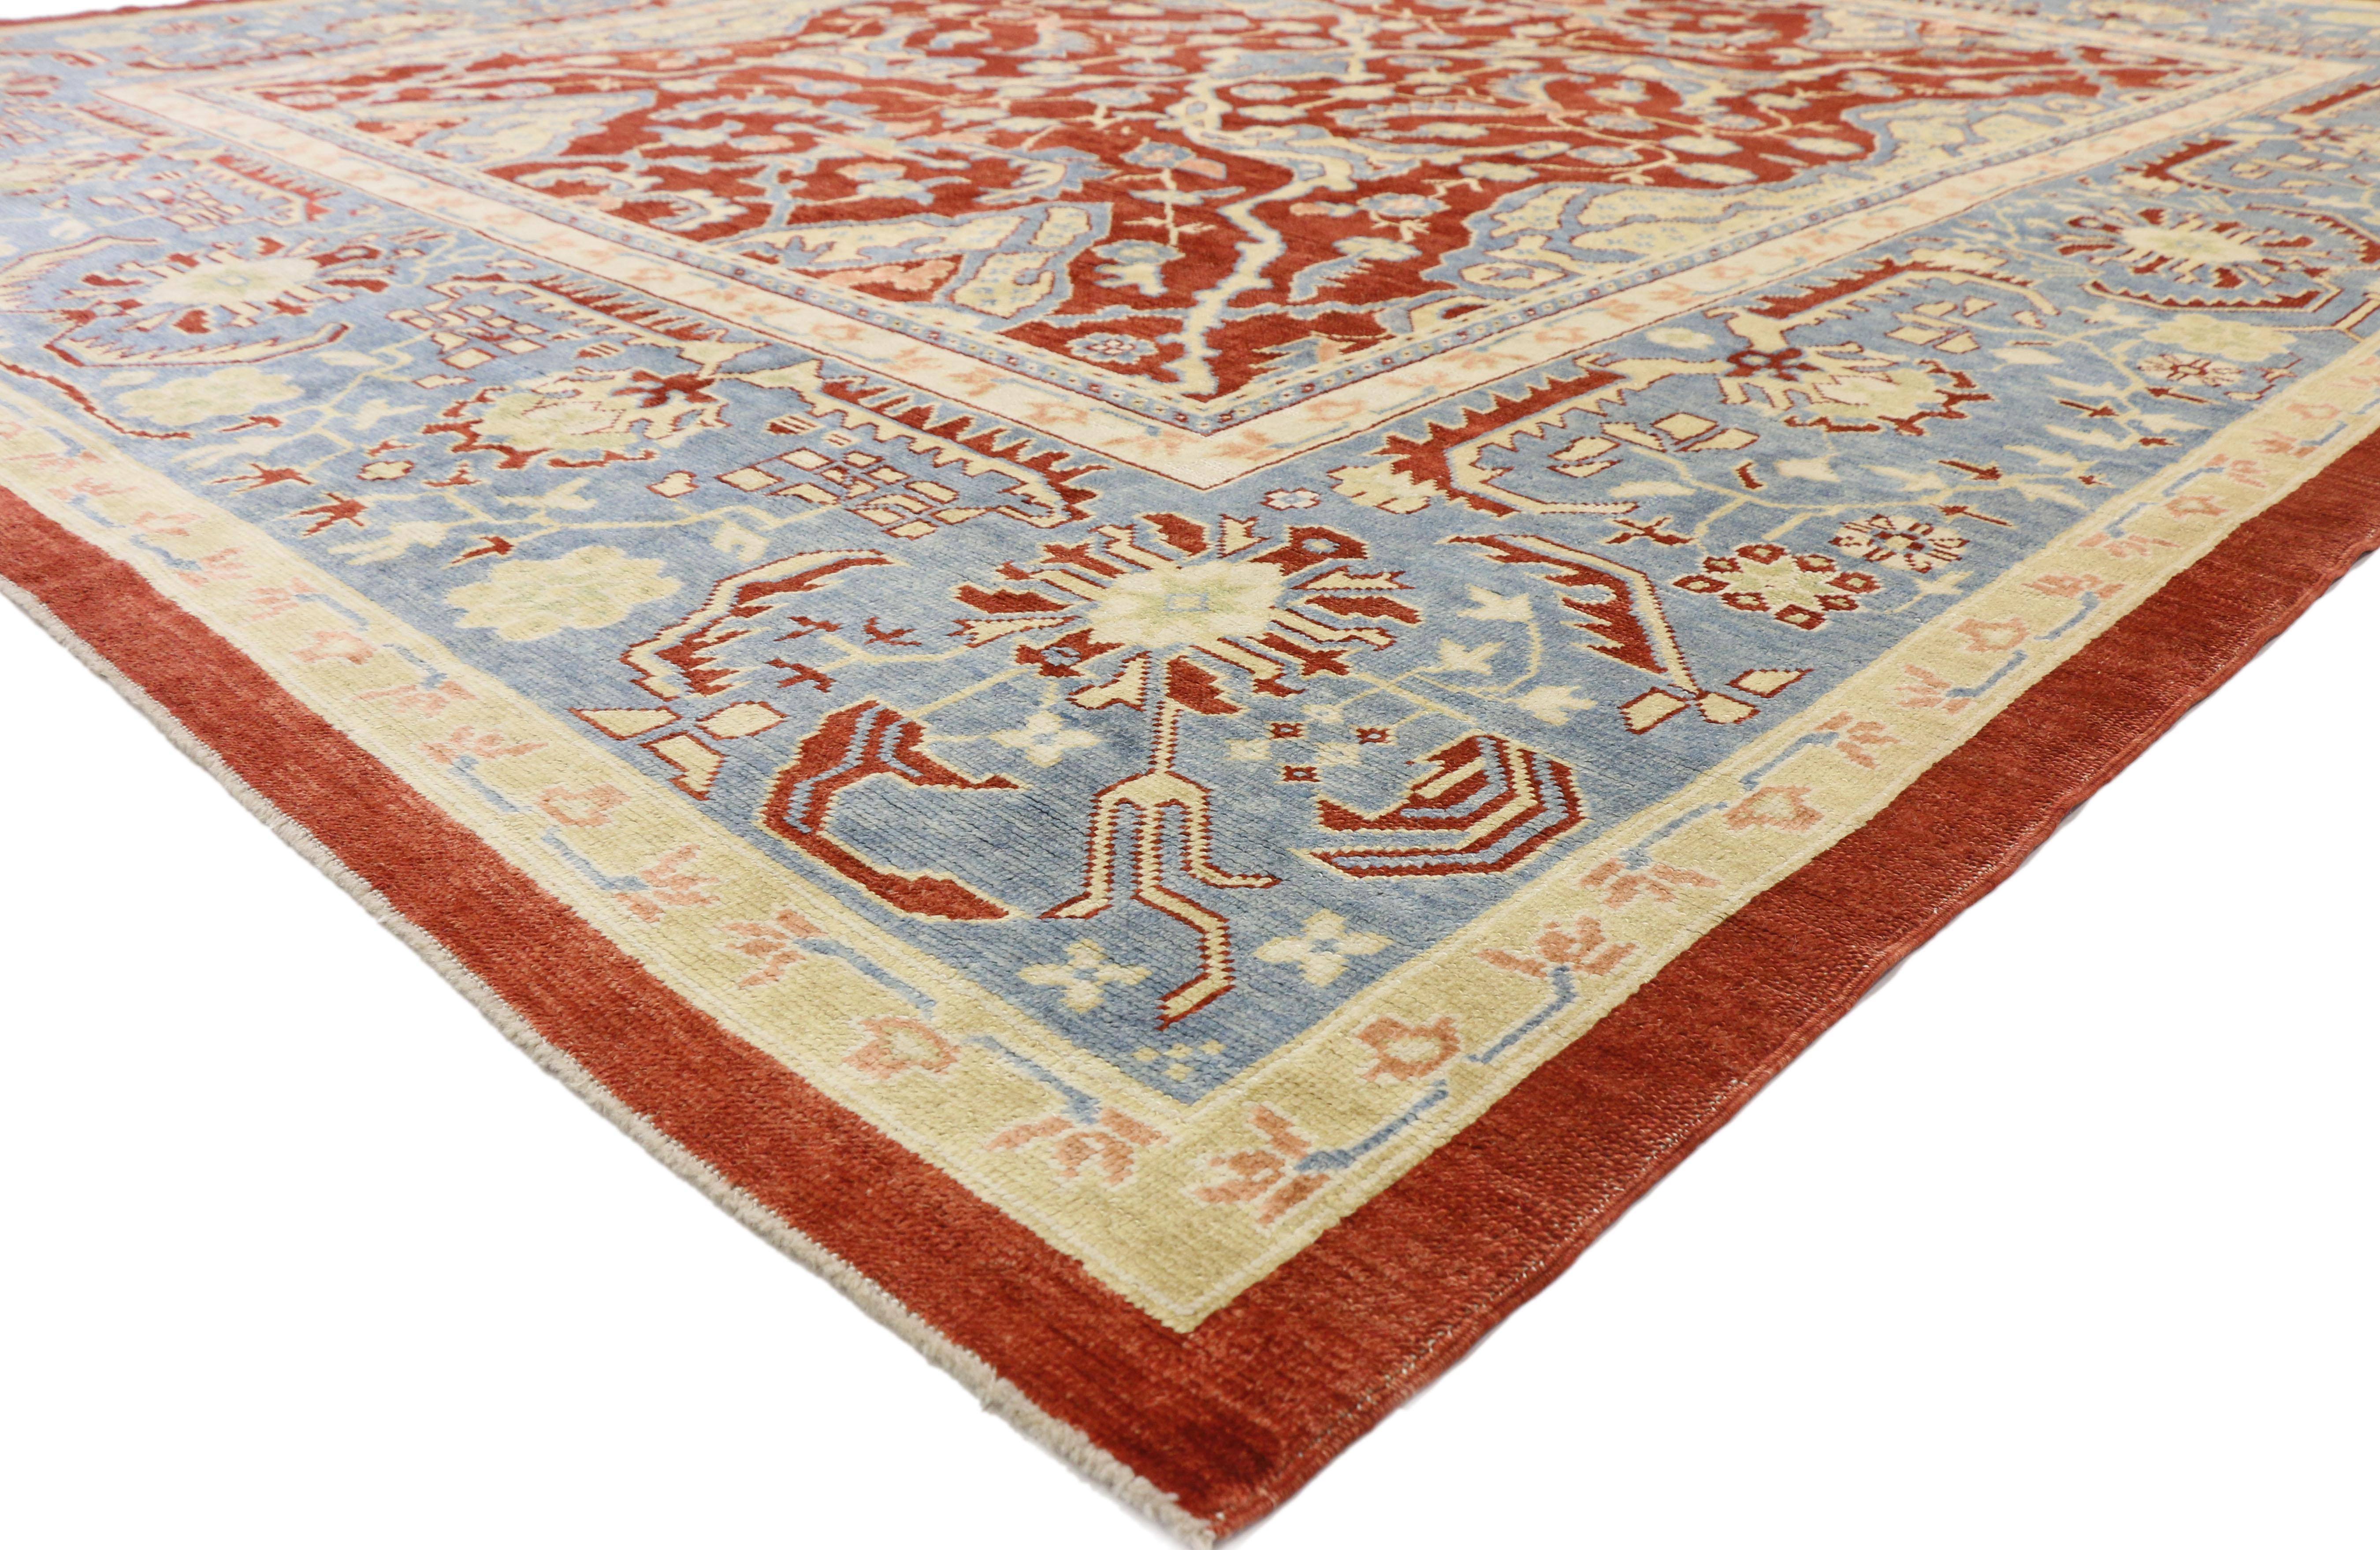 52429 New Contemporary Turkish Oushak rug with Modern American Colonial Federal style. Blending a Federal style and elements from the modern world, this hand knotted wool contemporary Turkish Oushak rug beautifully balances new and old. It features